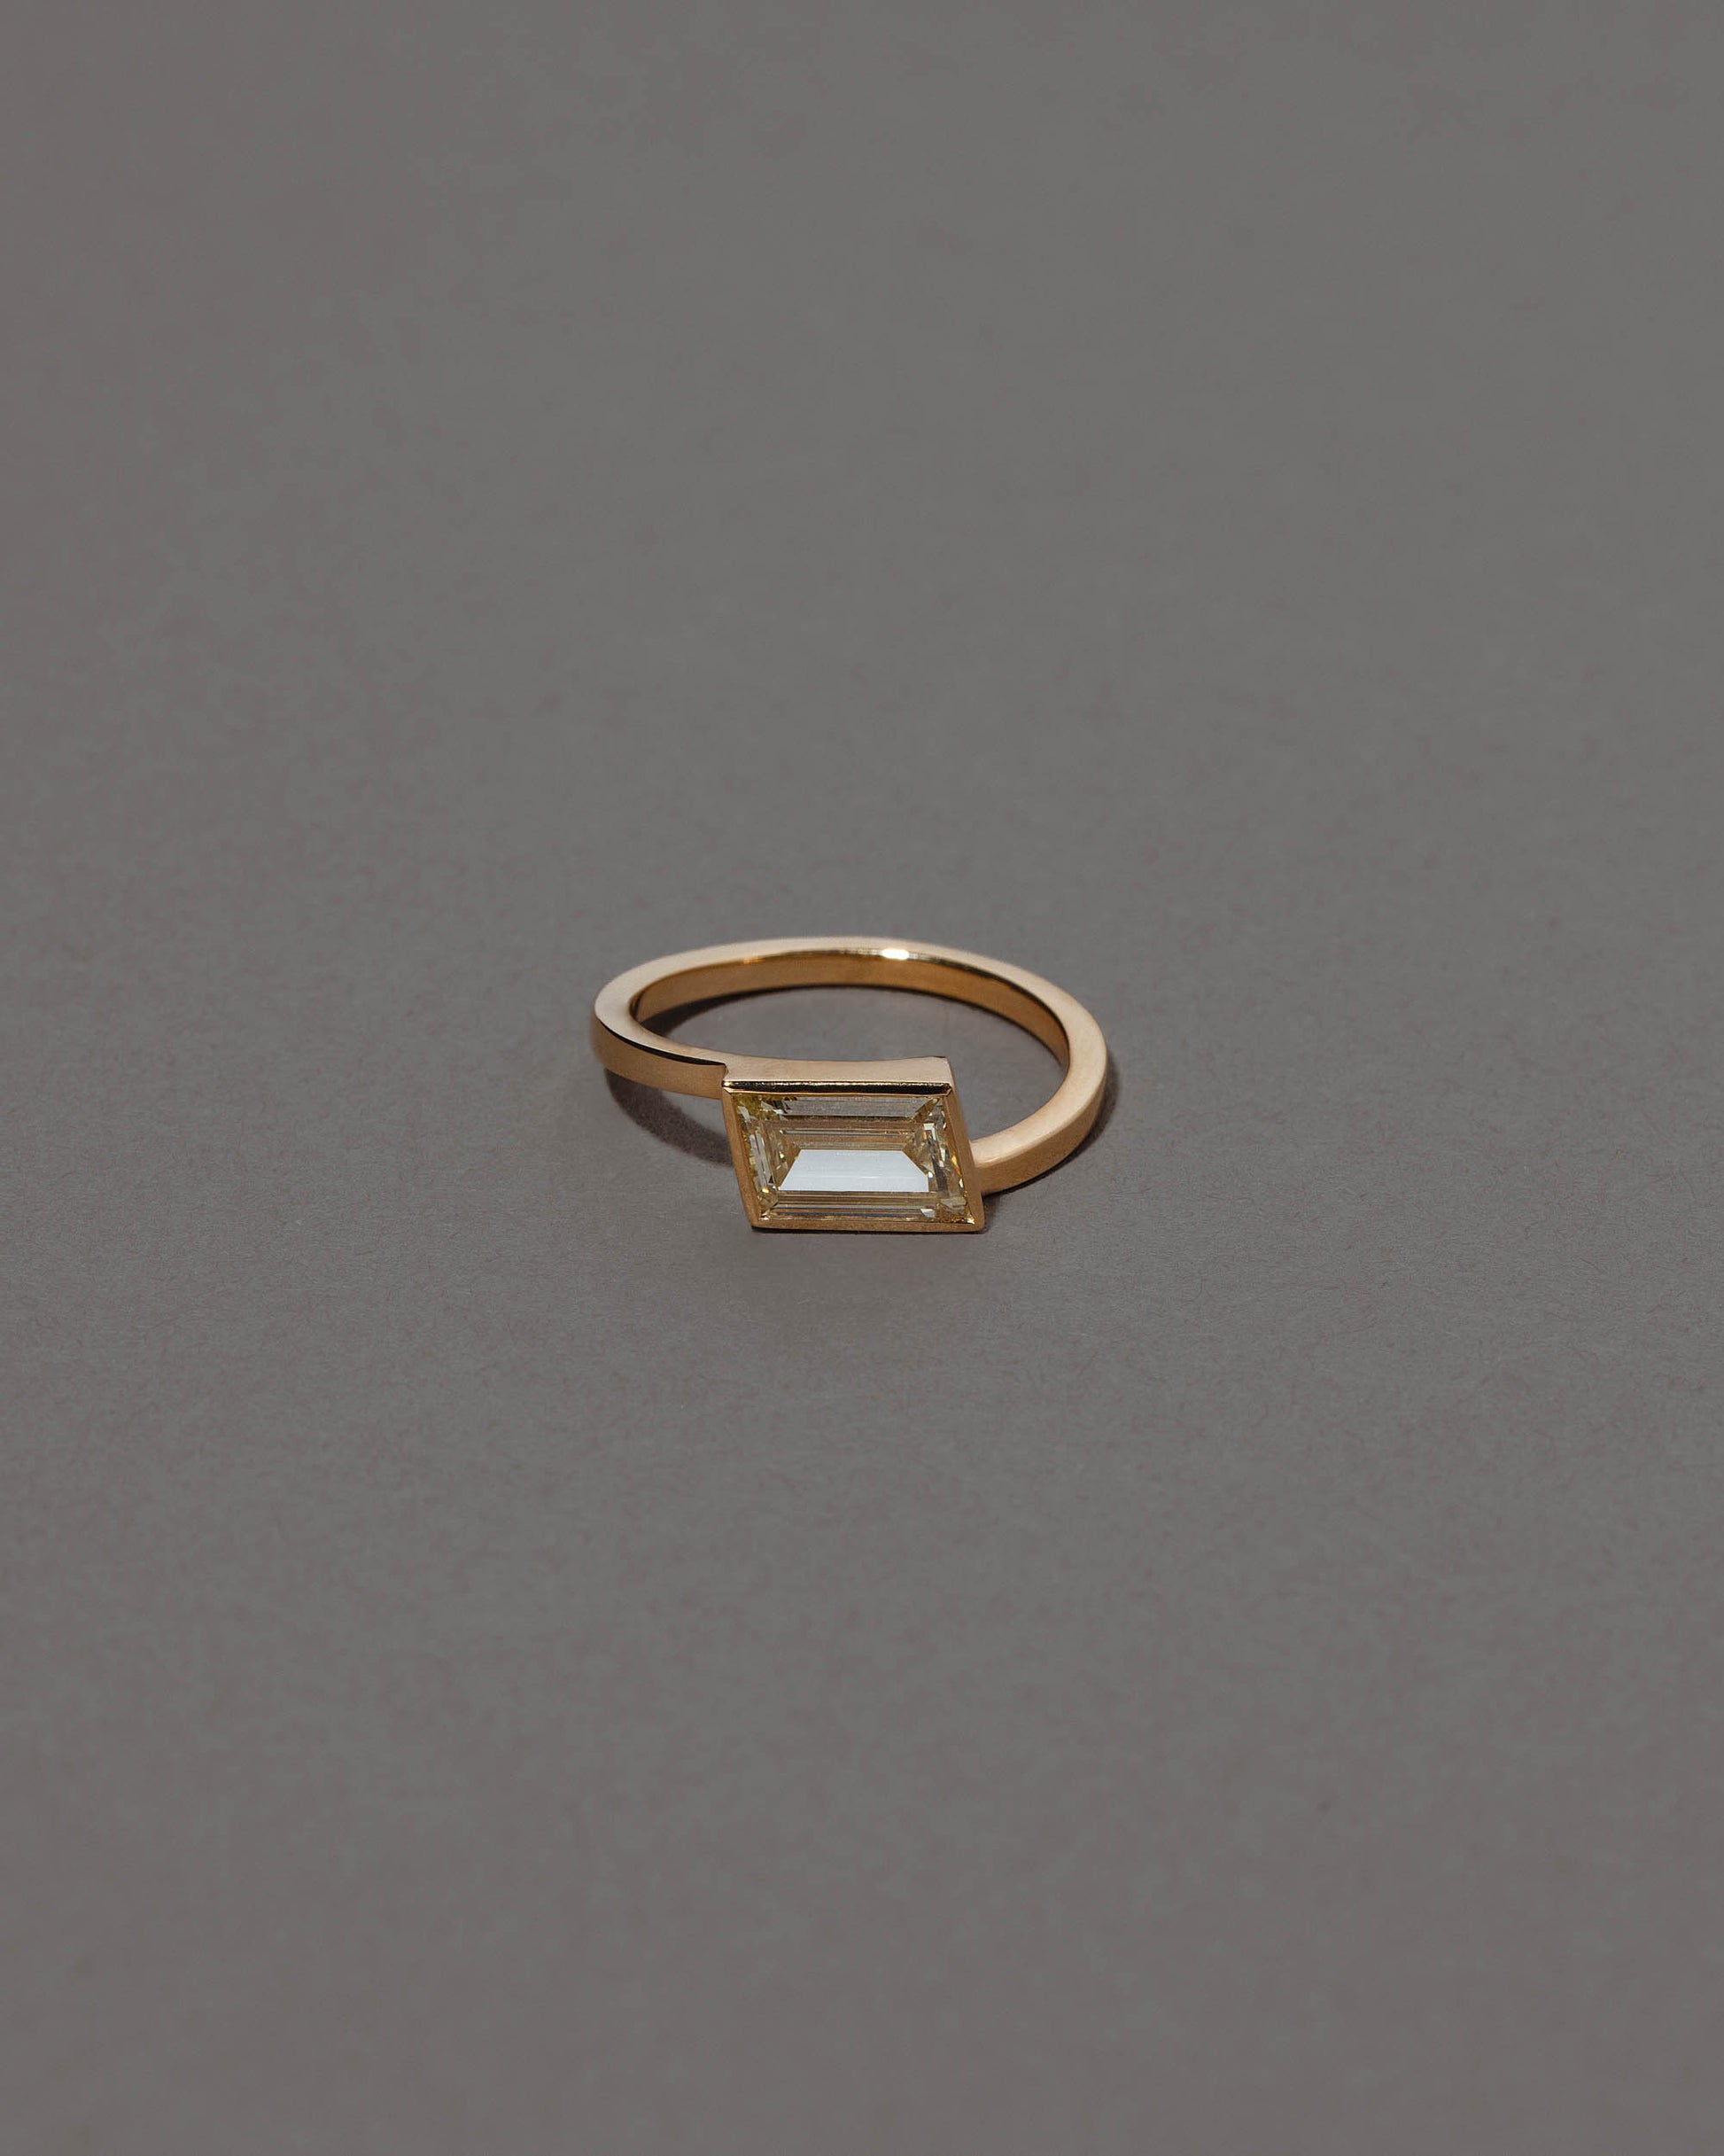 Jocundity Ring on grey color background.